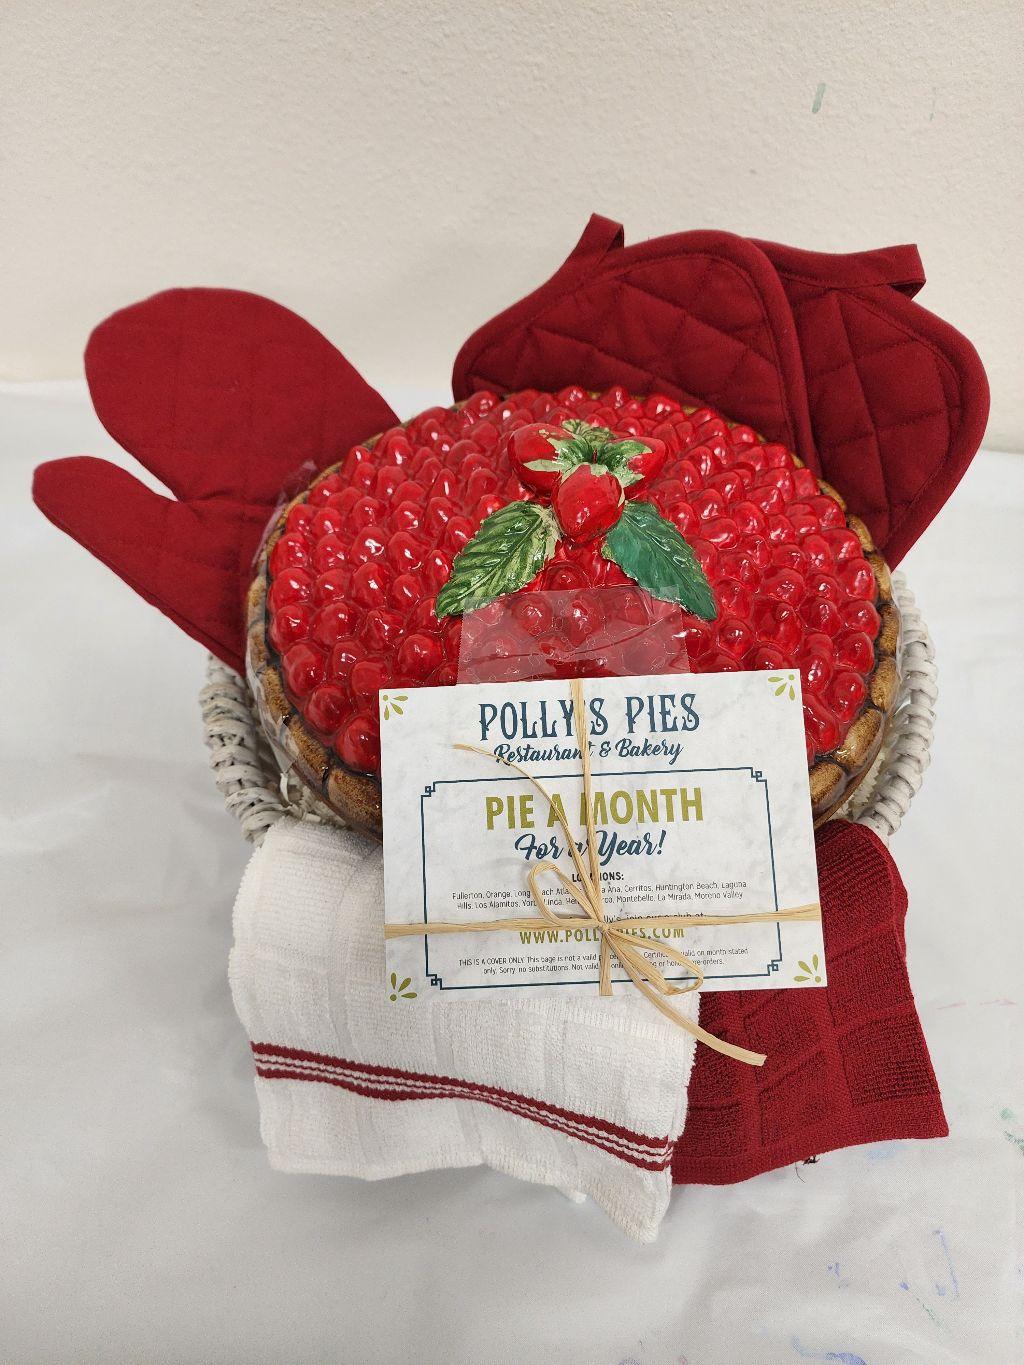 Polly's Pies Basket - Pie a Month for a Year!!